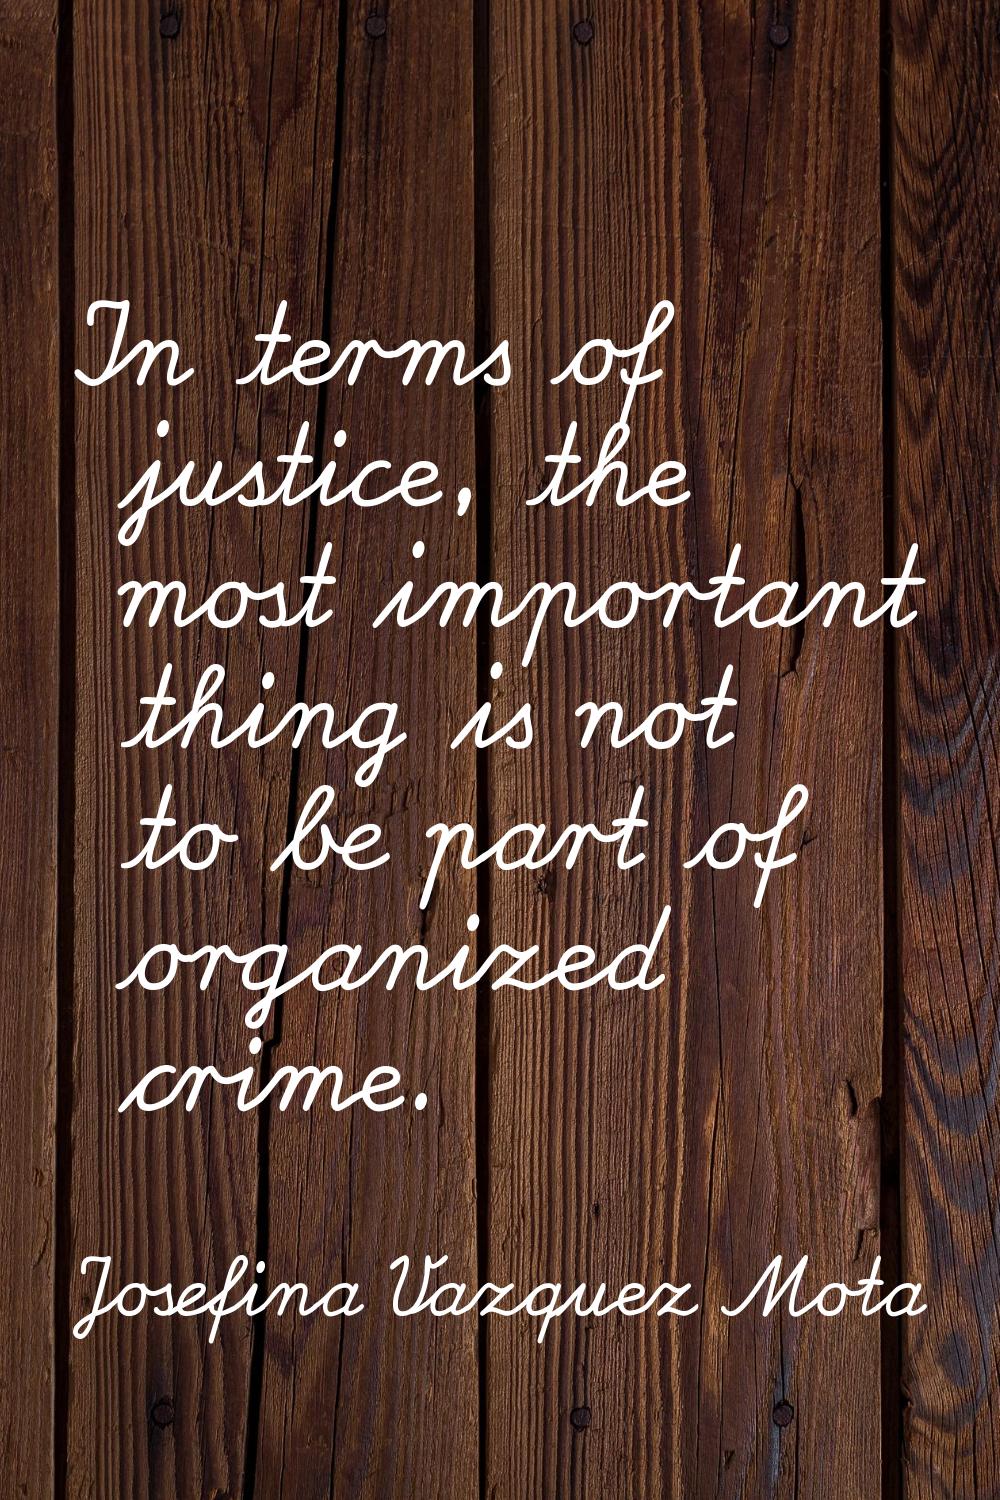 In terms of justice, the most important thing is not to be part of organized crime.